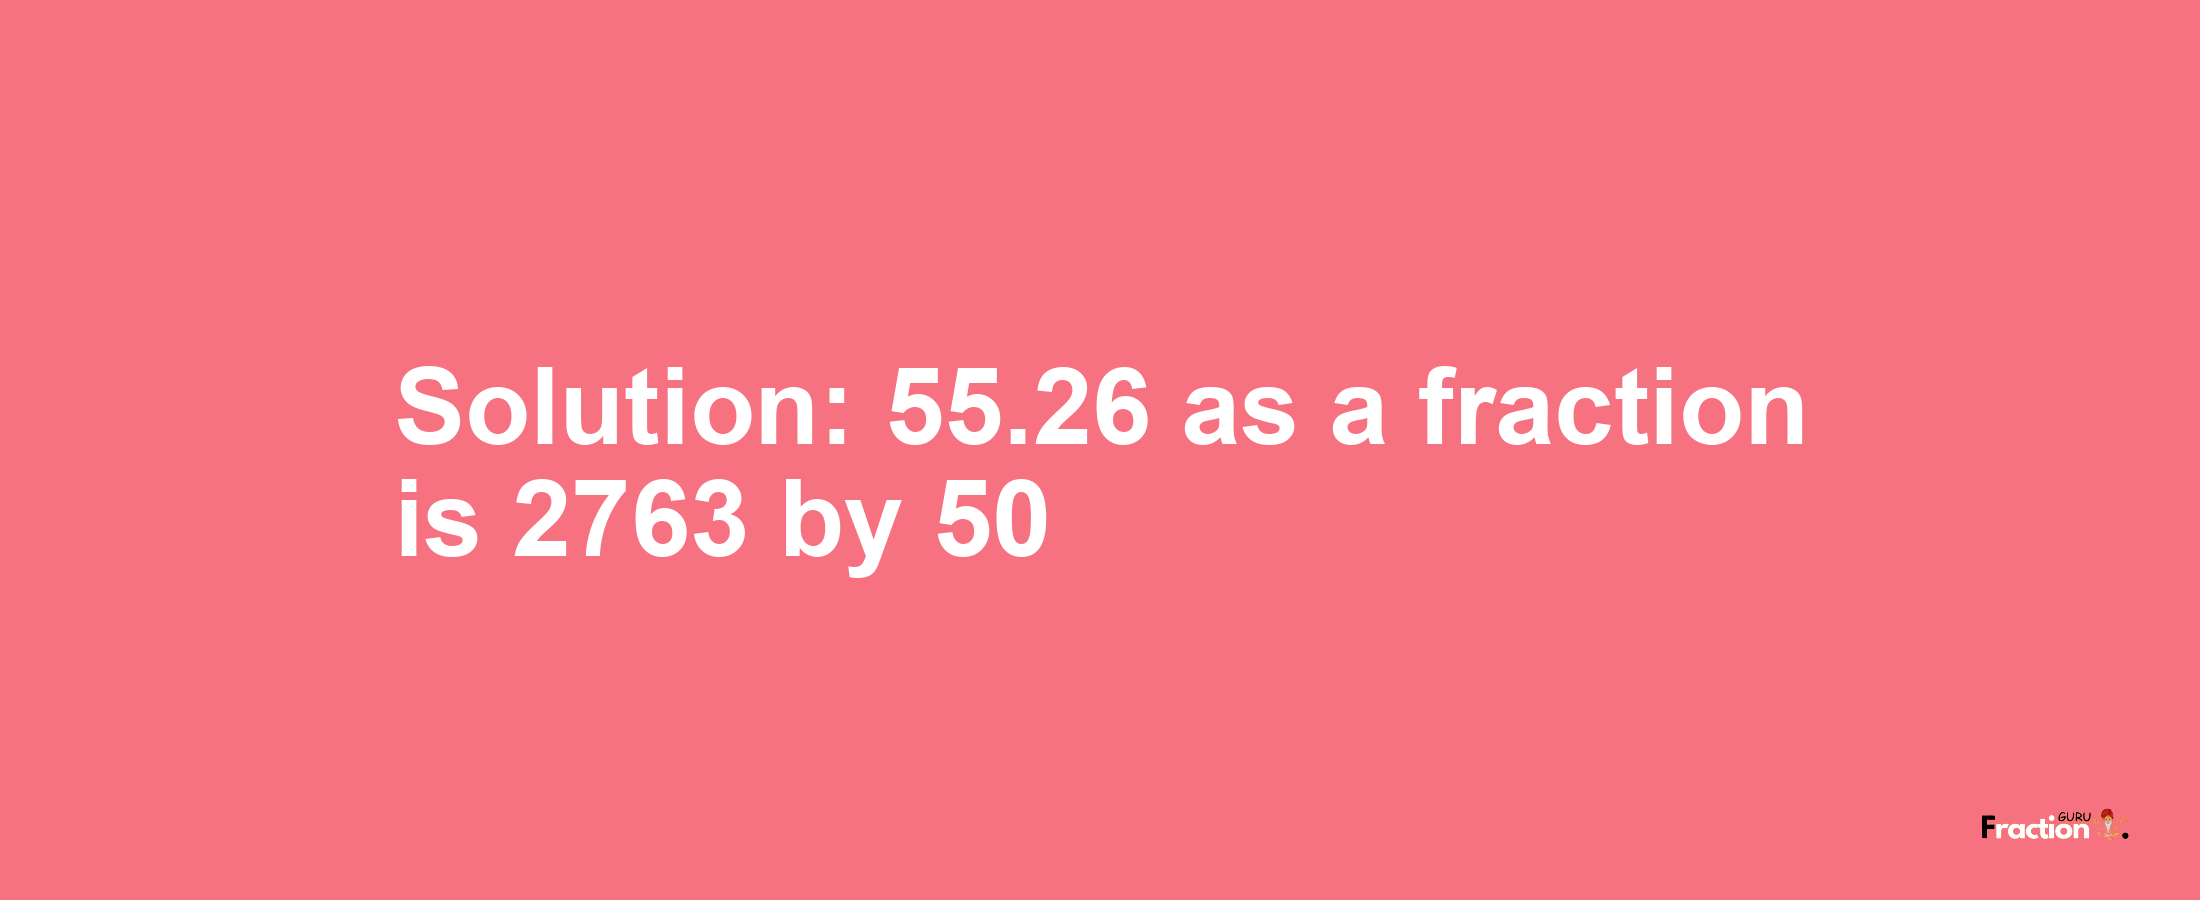 Solution:55.26 as a fraction is 2763/50